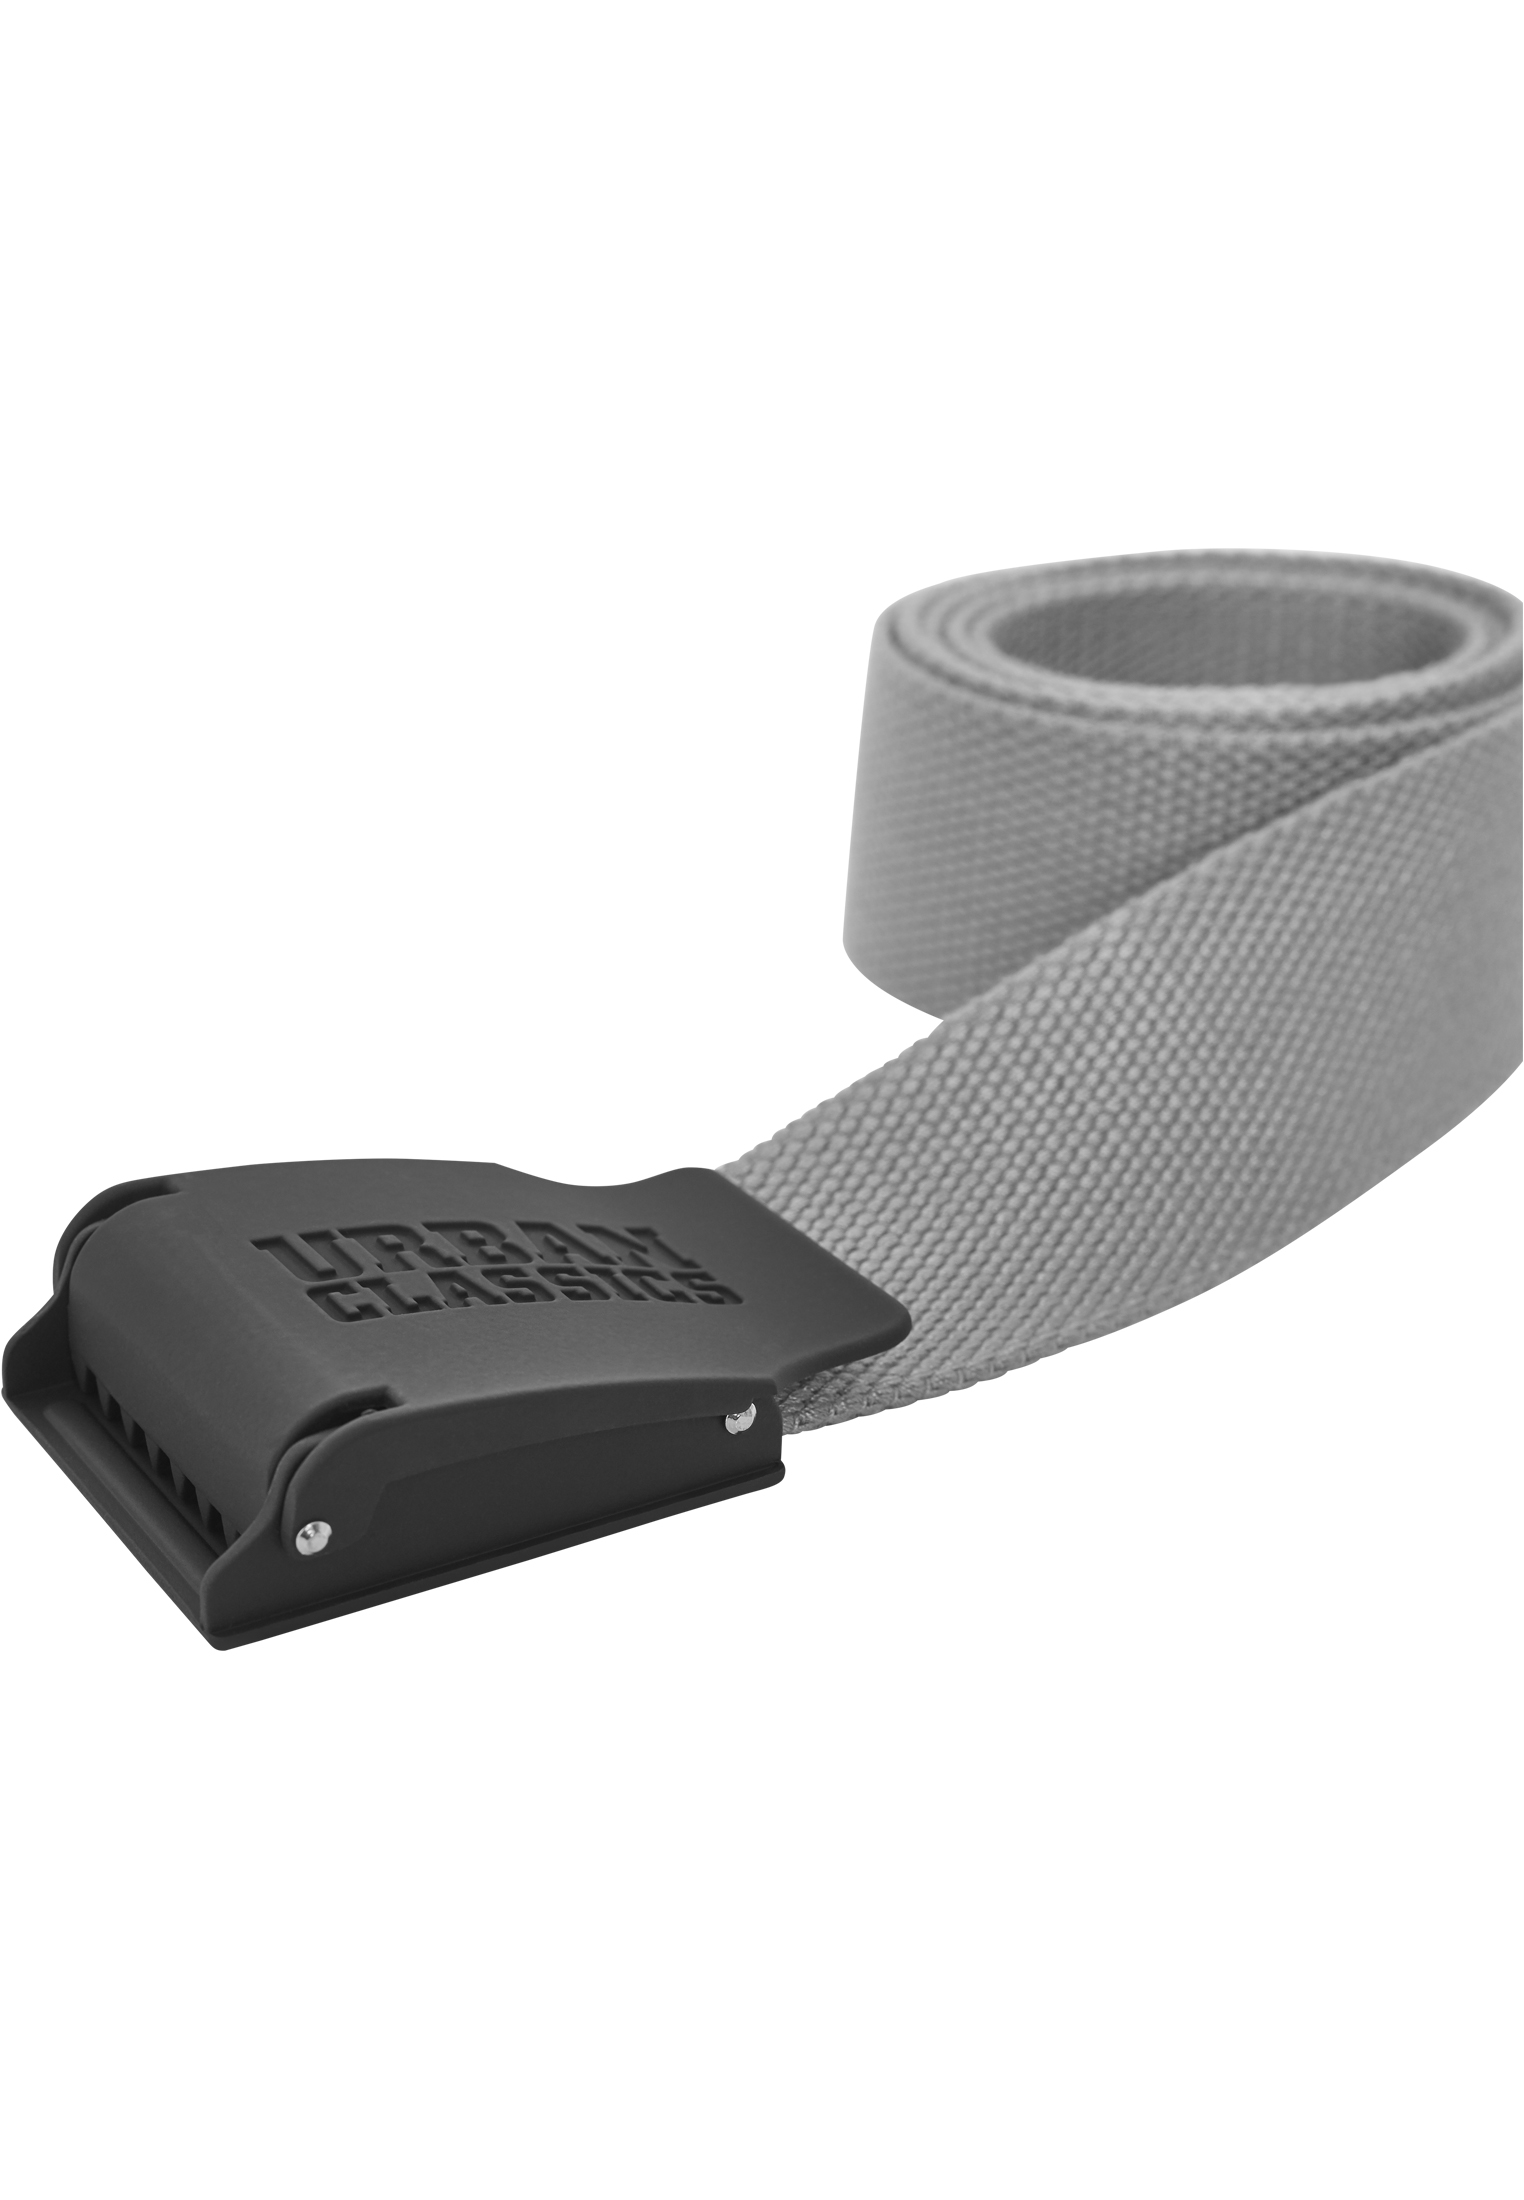 G?rtel Woven Belt Rubbered Touch UC in Farbe grey